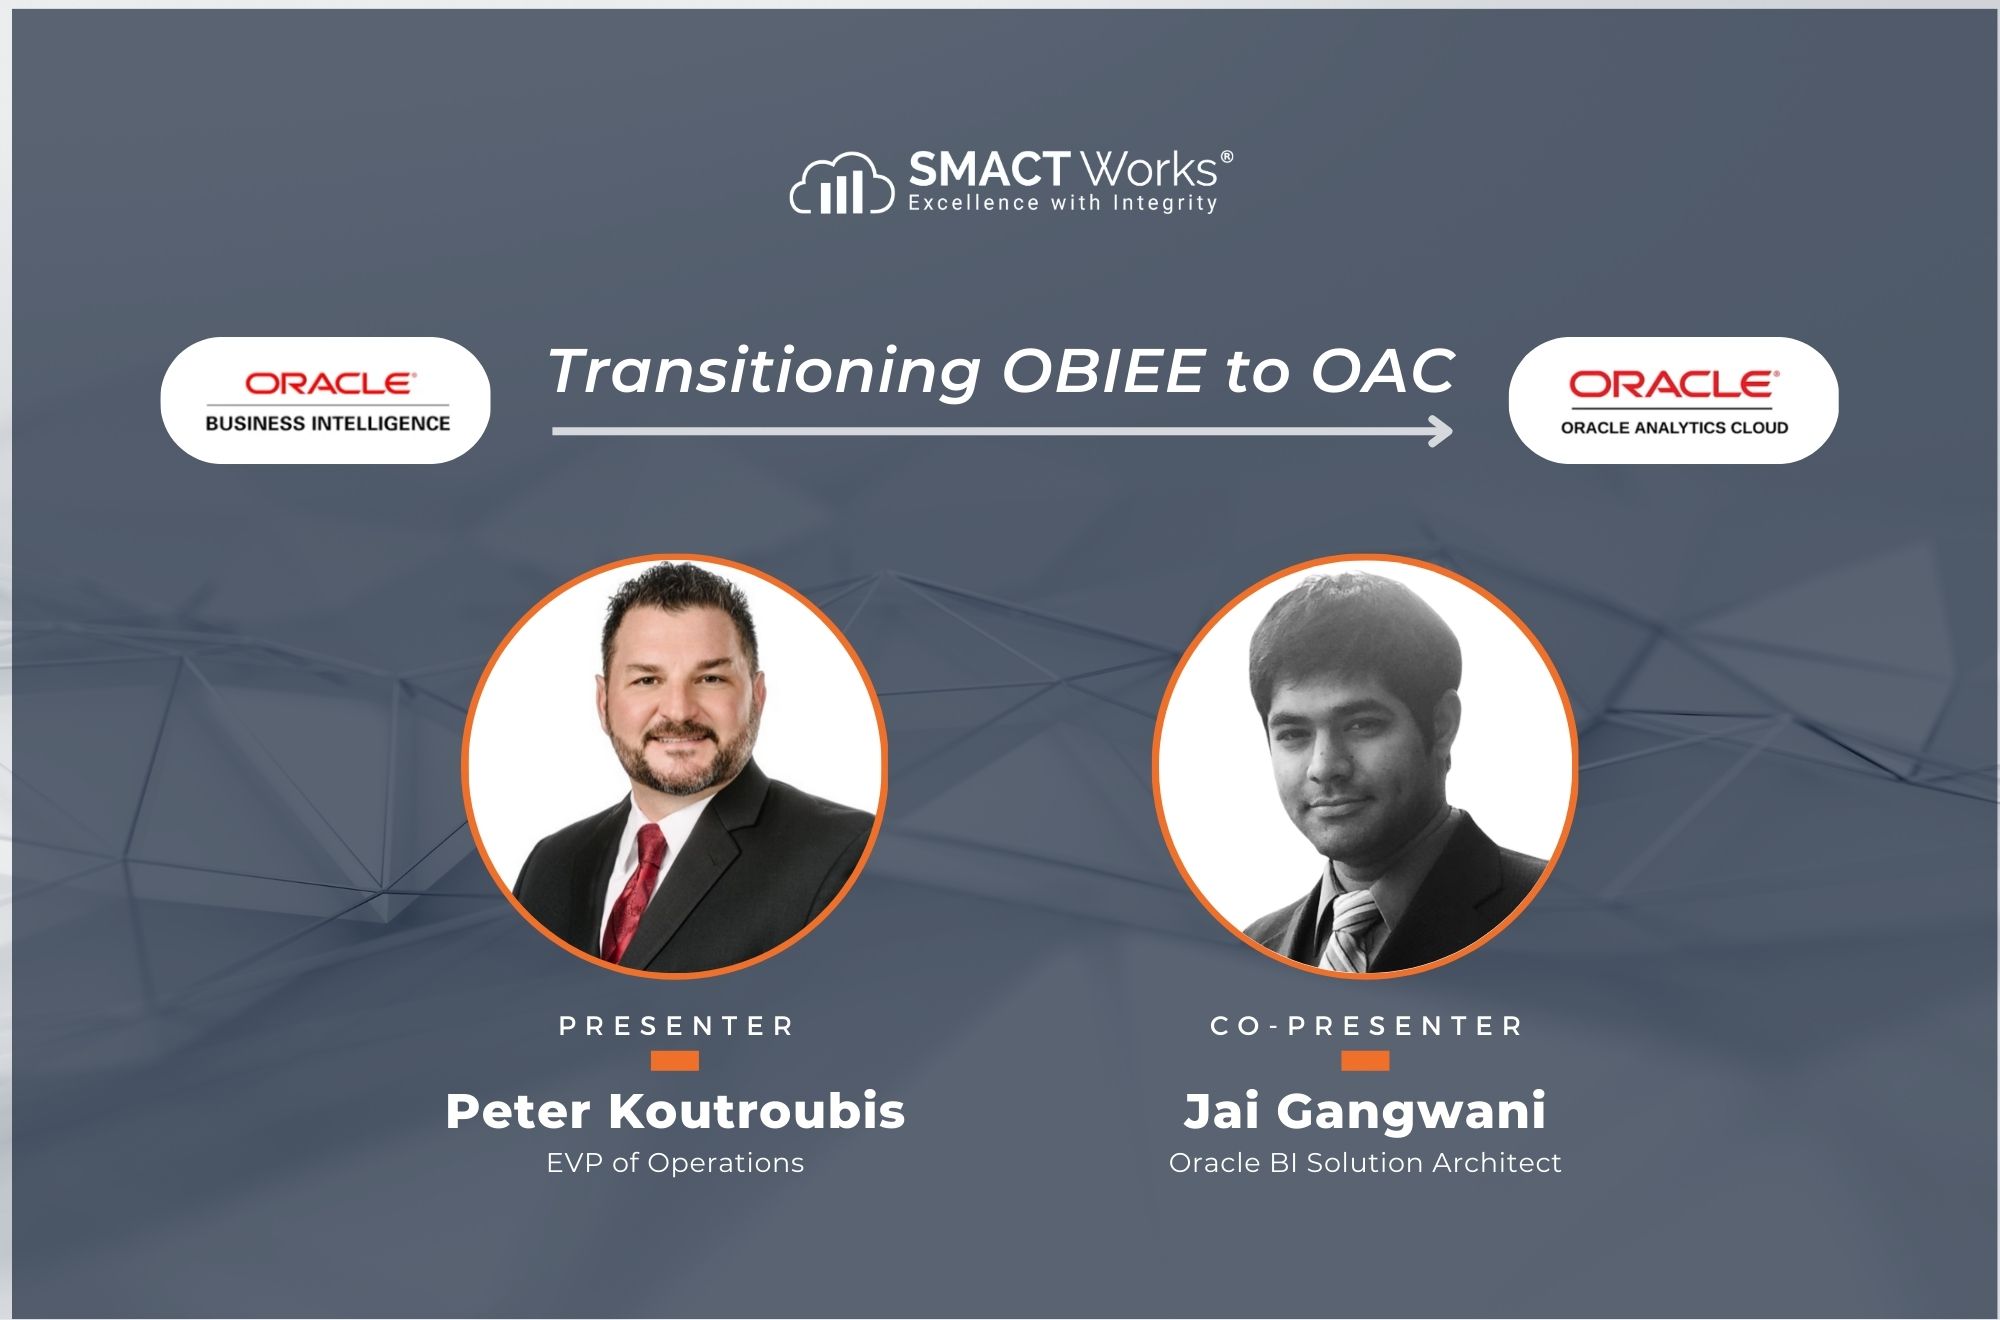 Transitioning OBIEE to OAC